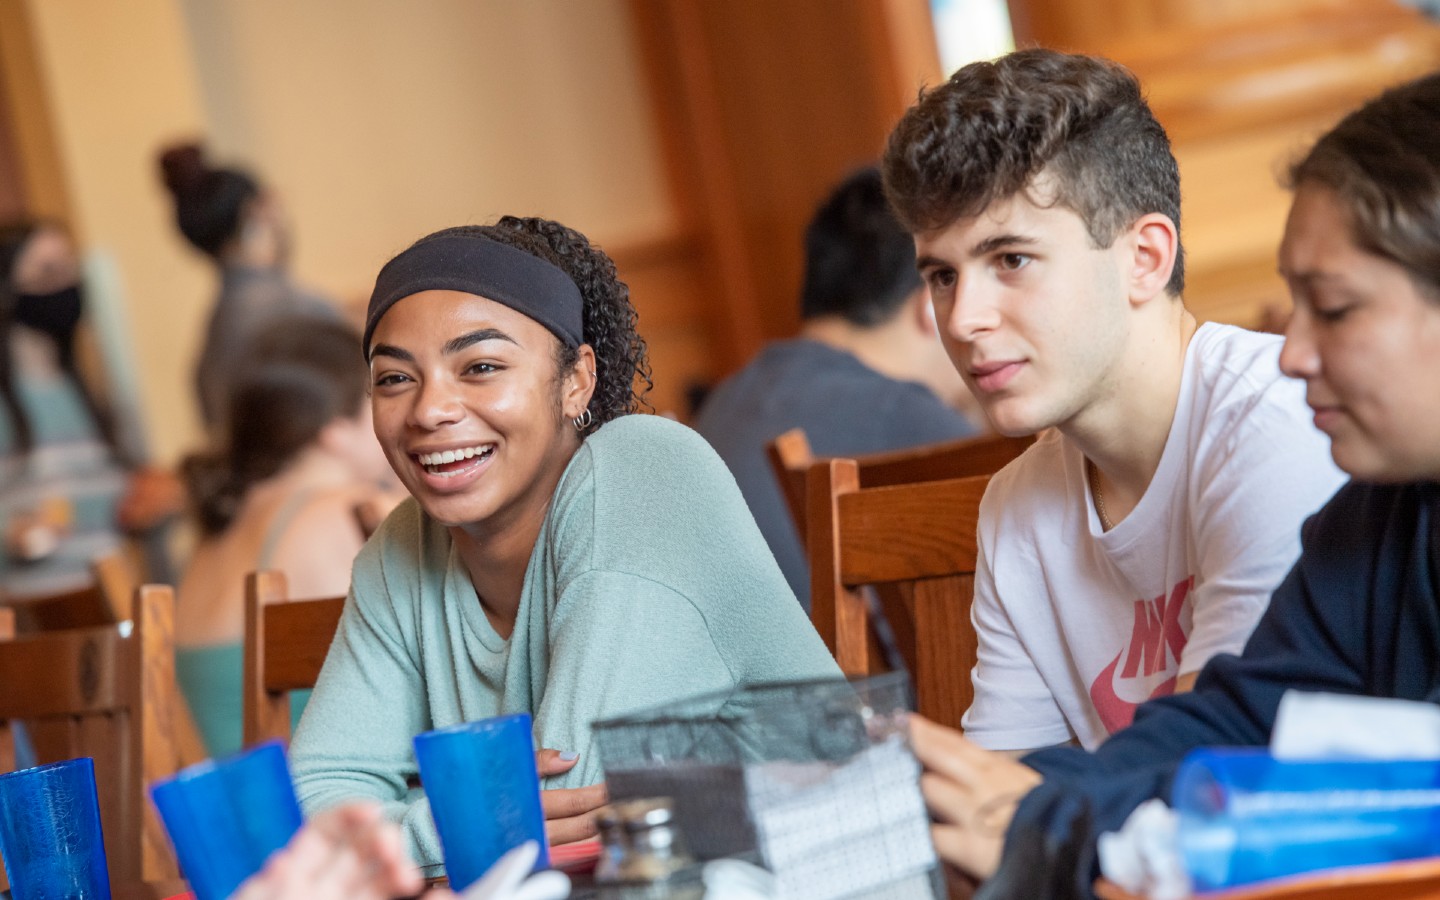 Students chat over a meal at Wood Dining Commons.